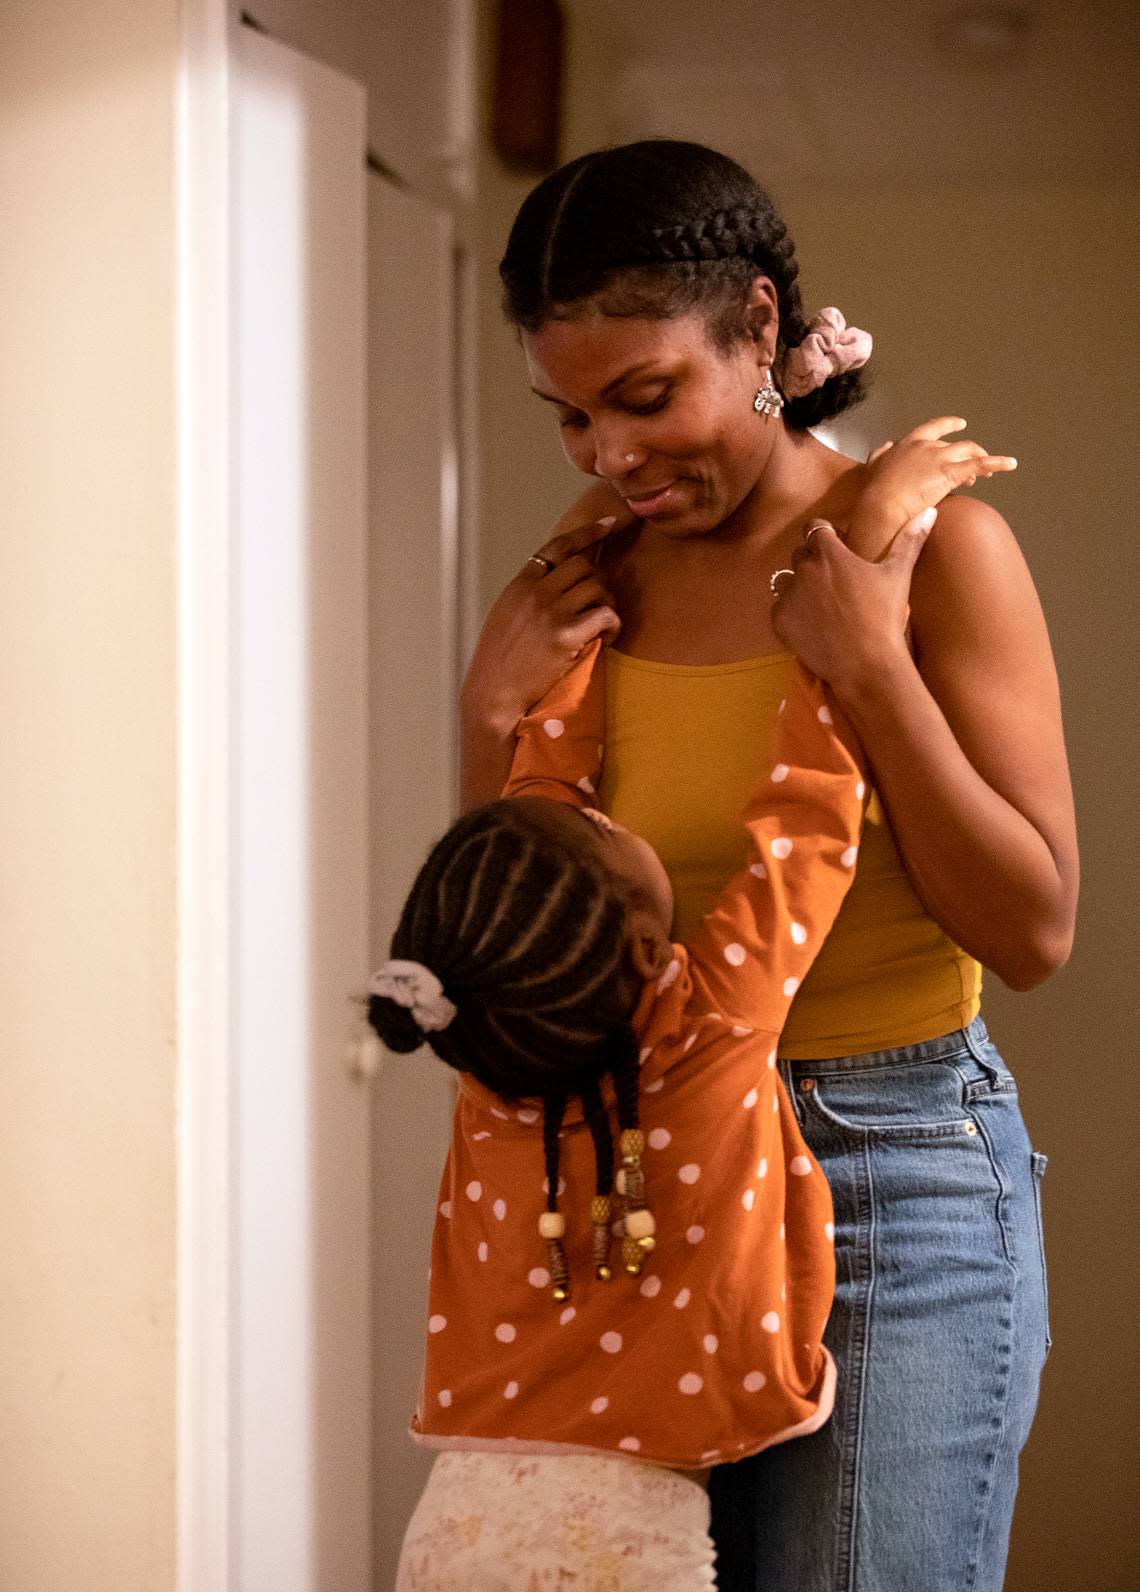 Sheba Everett hugs her daughter, Hannah Edgerton, 5, at their home in Durham, N.C. on Wednesday, Oct. 26, 2022. After renting the house where she lives with her five daughters for over two years, Everett received a notice to vacate by May 31, 2023. The Eno River Association, which owns this home and six others nearby, plans to transfer the property to the state.